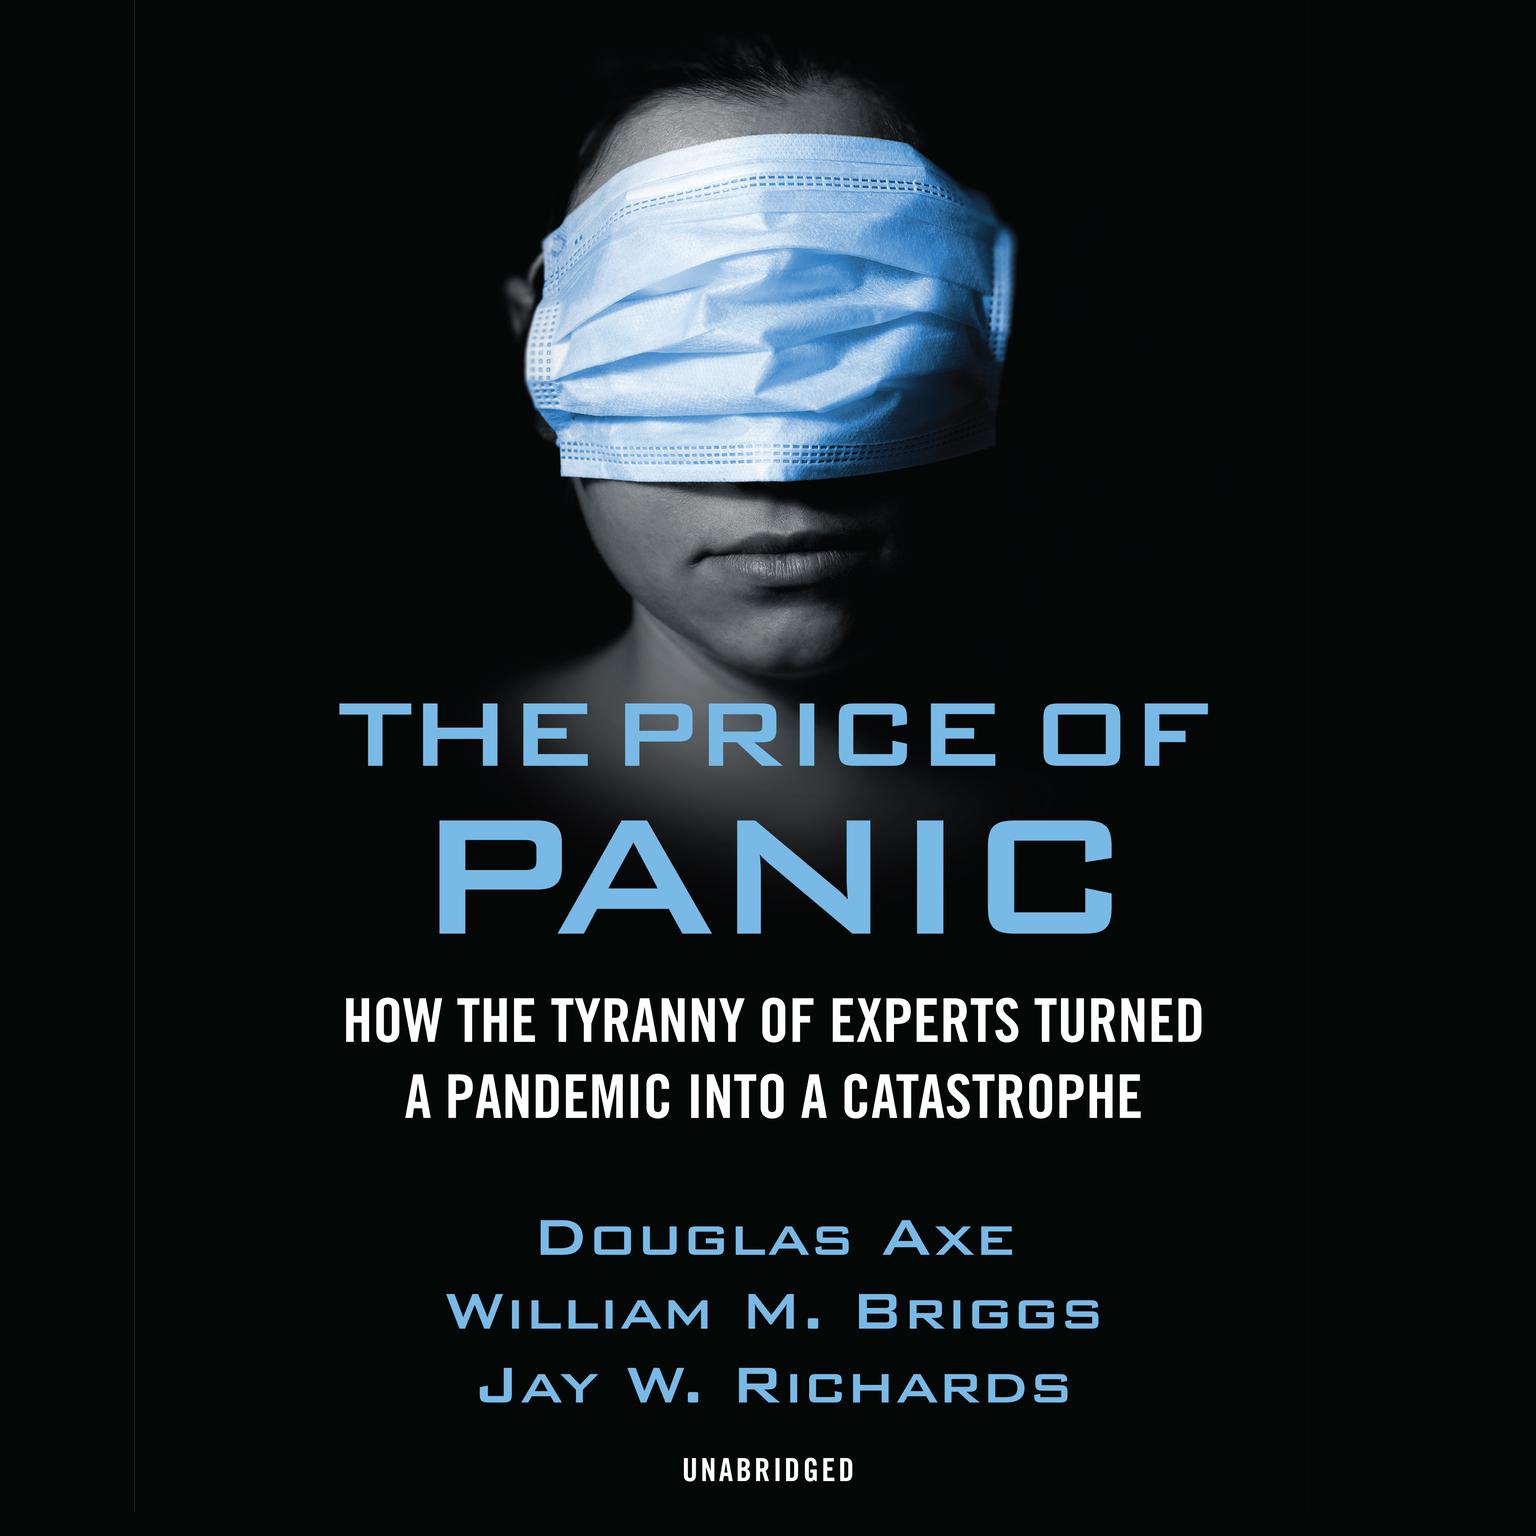 The Price of Panic: How the Tyranny of Experts Turned a Pandemic into a Catastrophe Audiobook, by Douglas Axe